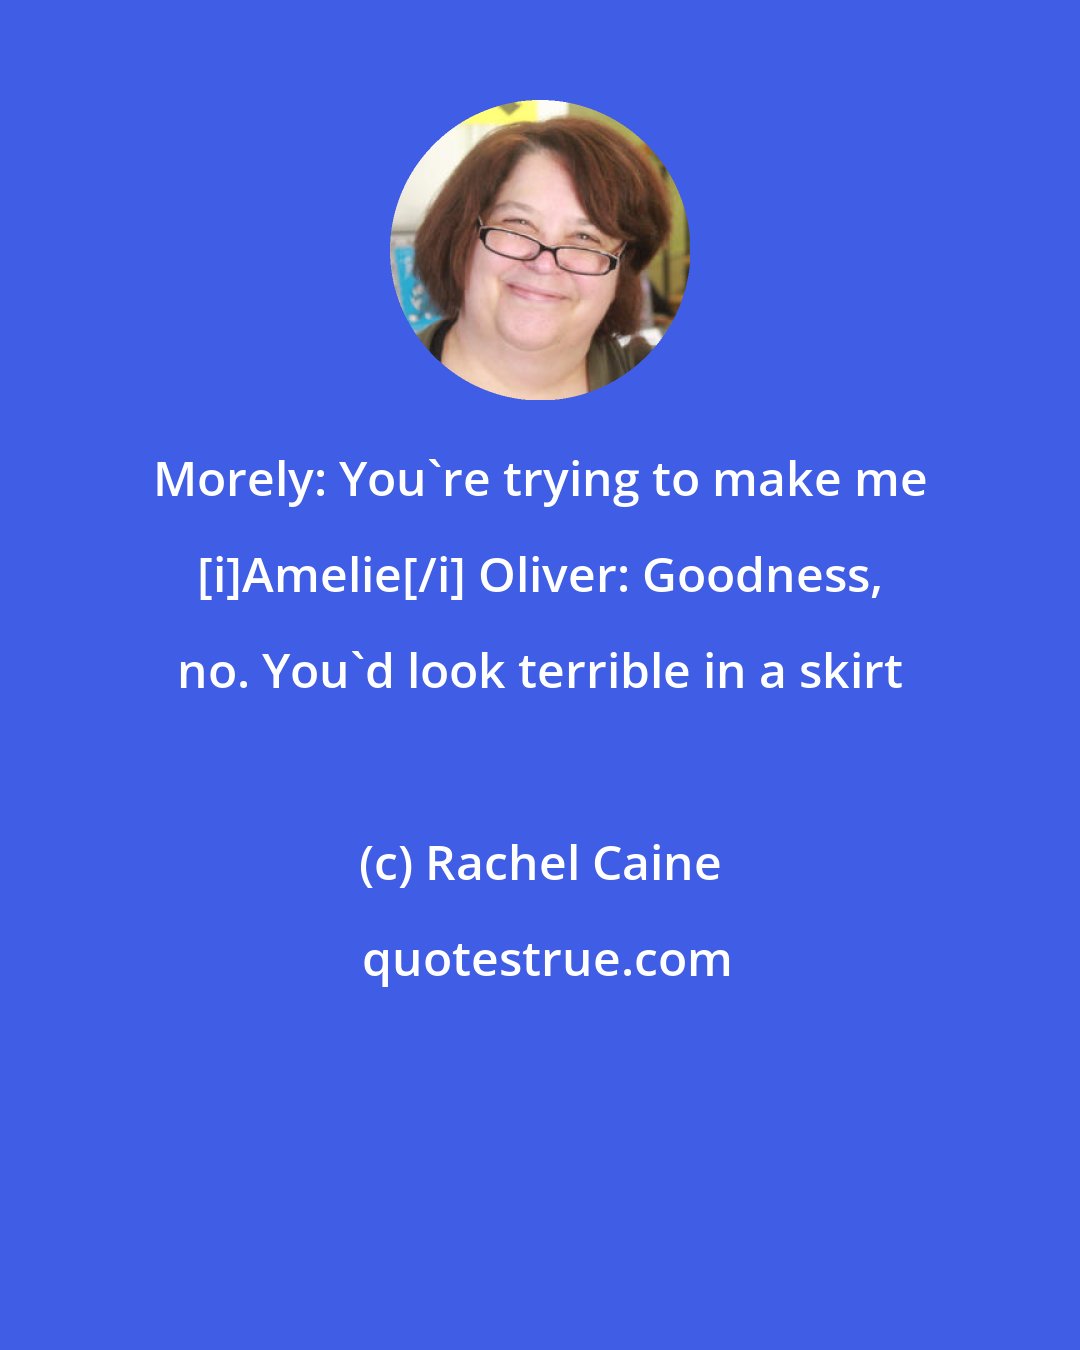 Rachel Caine: Morely: You're trying to make me [i]Amelie[/i] Oliver: Goodness, no. You'd look terrible in a skirt